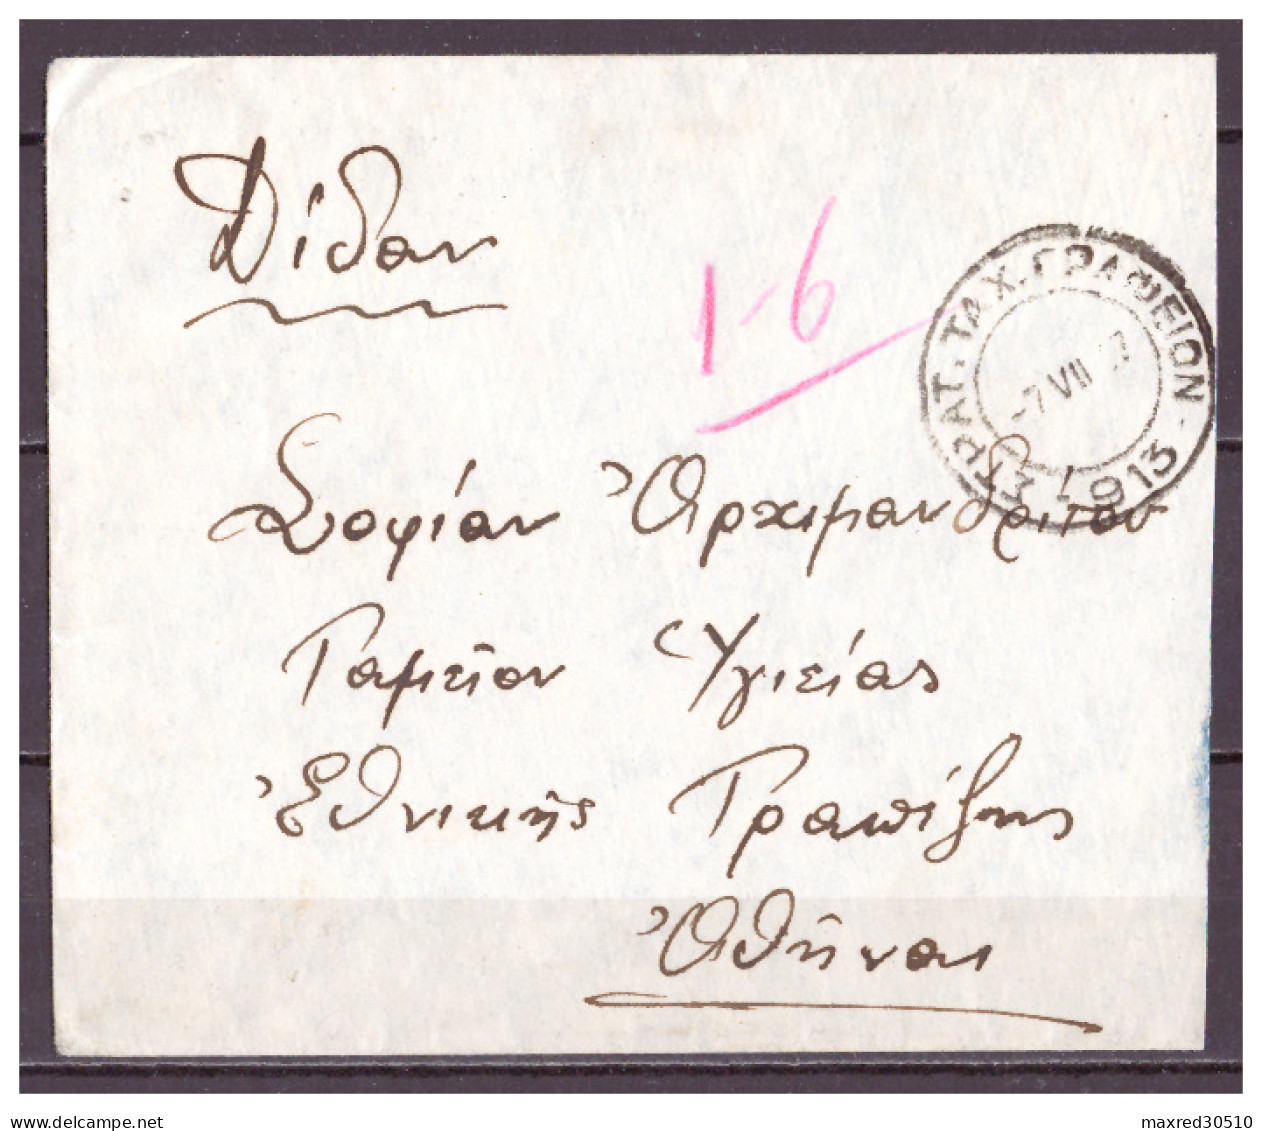 GREECE 1947 MILITARY CENSORED COVER CANCELLED "913 MILITARY POST OFFICE" TO ATHENS + "105 FIELD ARTILLERY REGIMENT" VF - Postal Logo & Postmarks